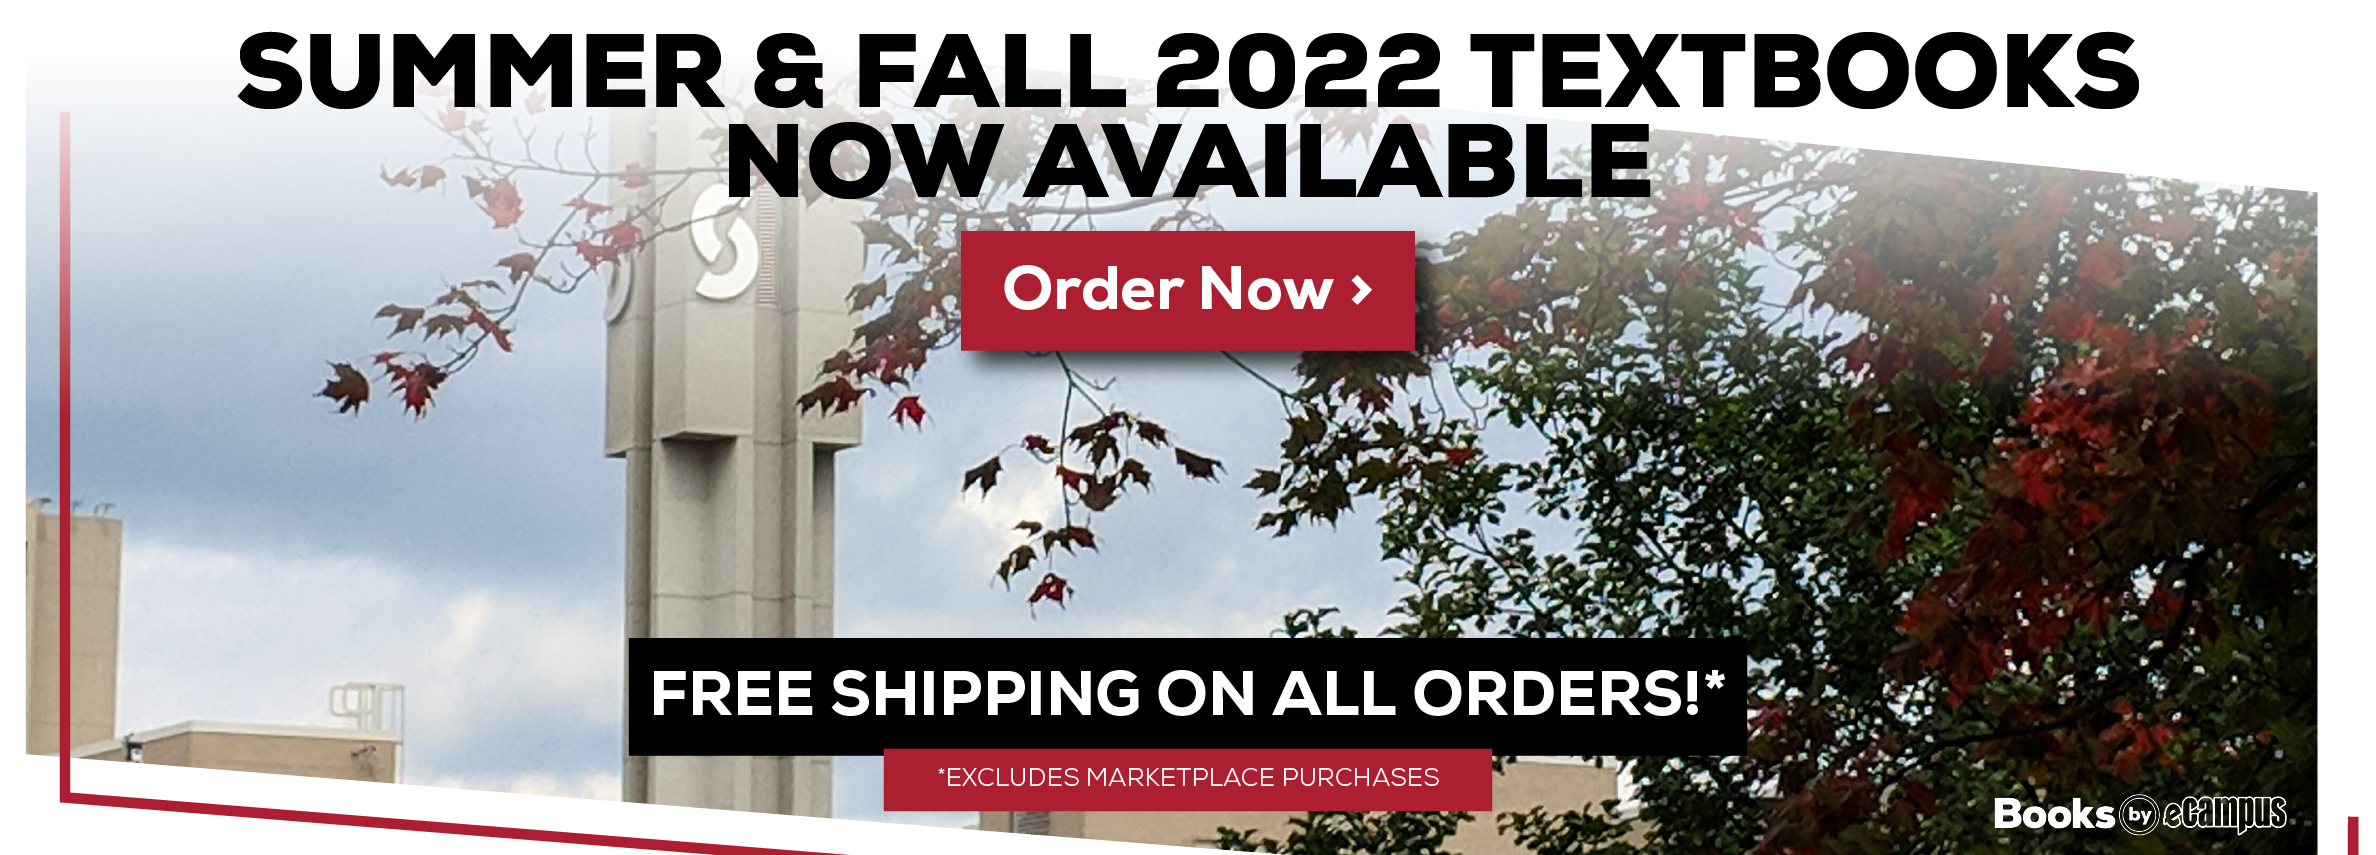 Summer and fall 2022 Textbooks now available. Order now.  Year-Round free expedited to campus or standard to home, $5 flat rate UPS to home